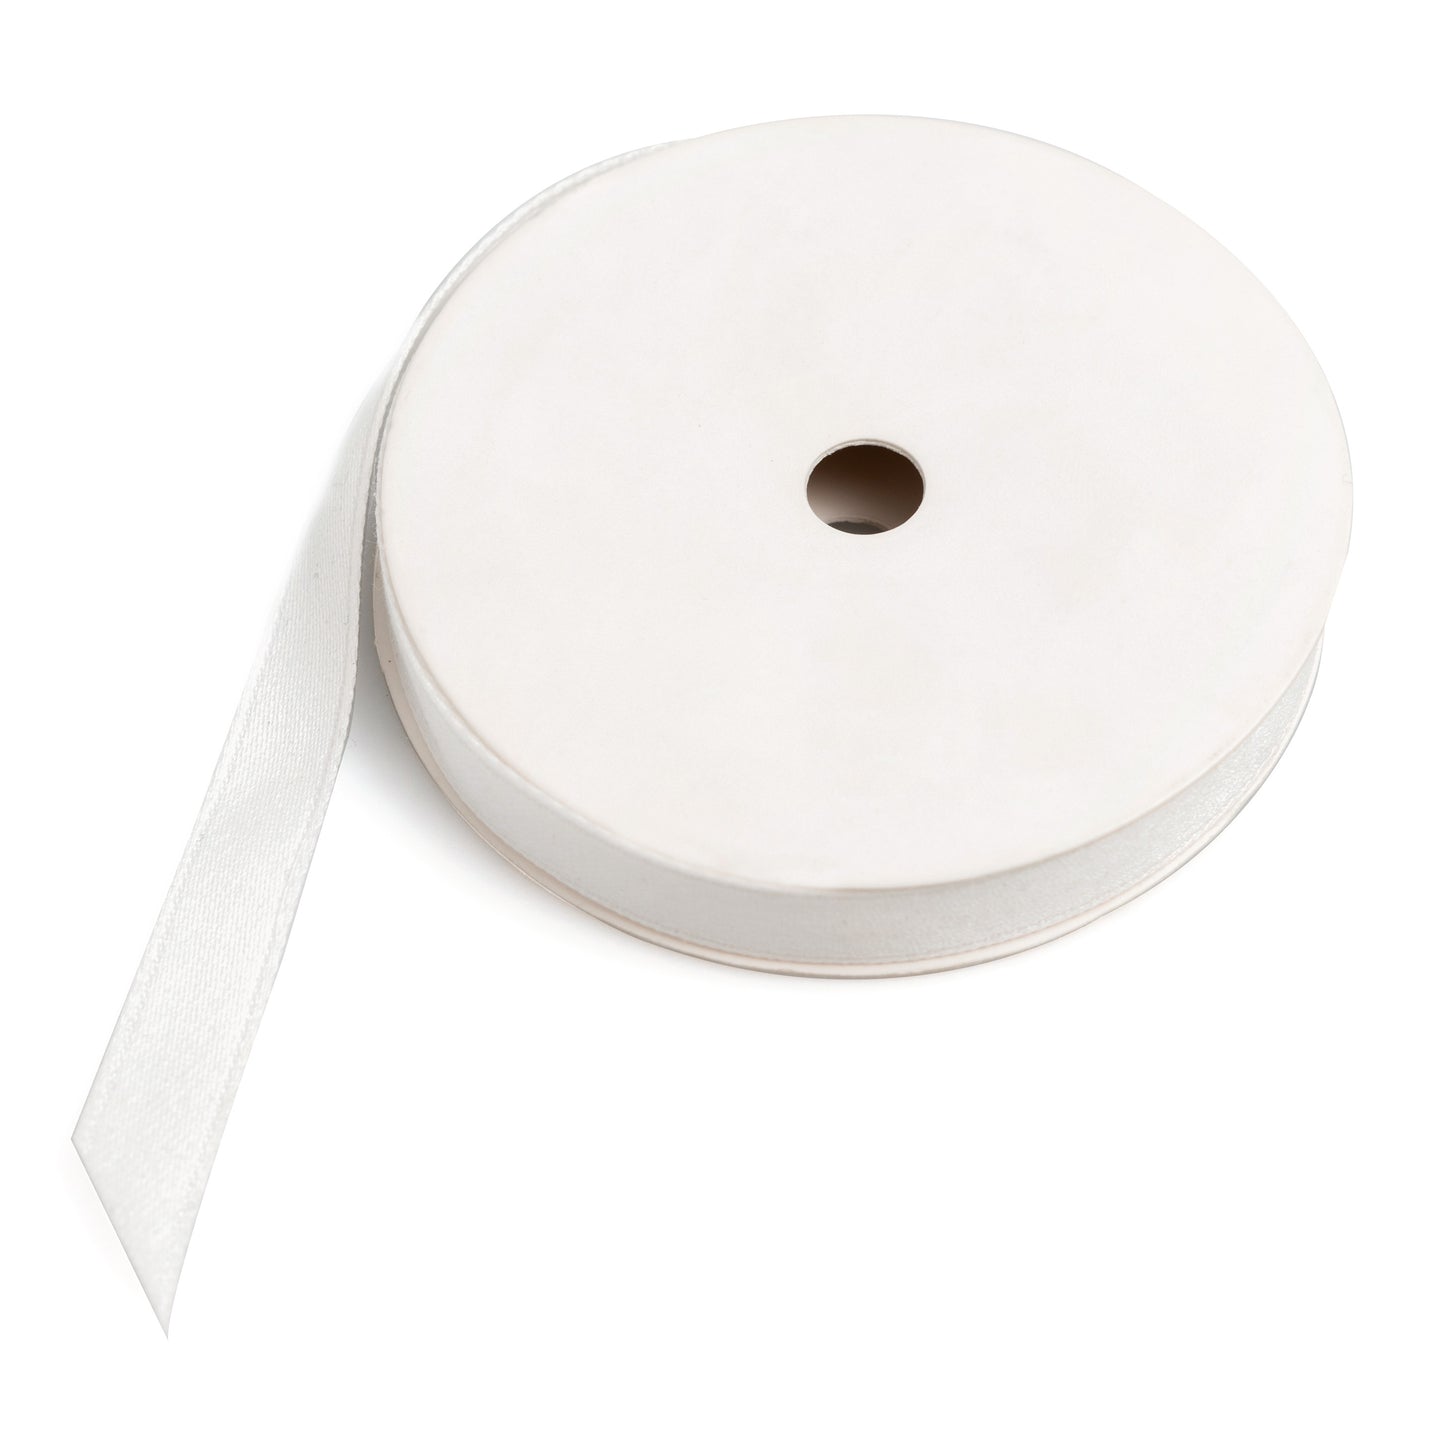 We R Memory Keepers PrintMaker White Cotton Ribbon-10mm X 10yd